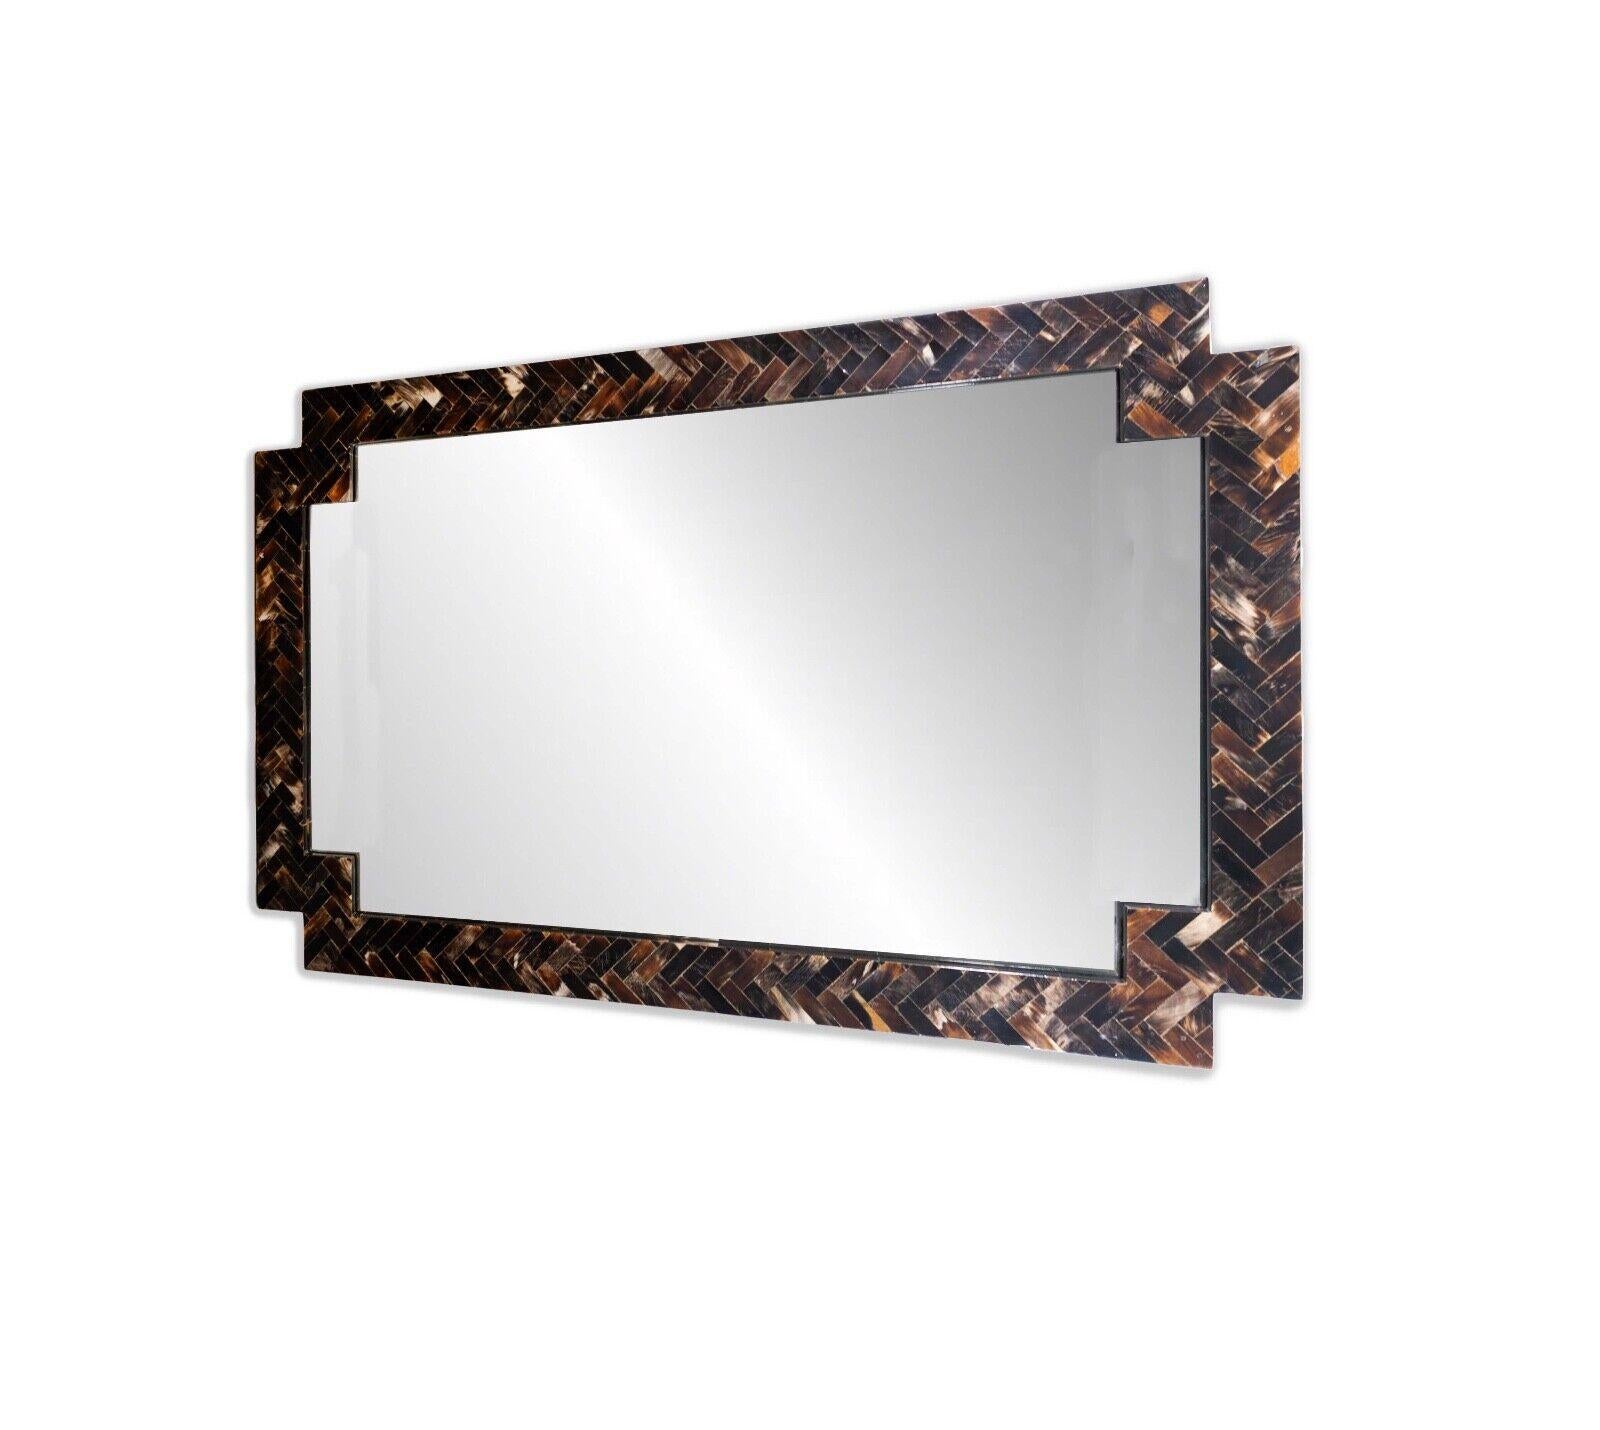 Elevate your living space with this exquisite Tessellated Stone Hanging Mirror, seamlessly blending the opulence of tessellated stone craftsmanship with the sleek lines of Mid Century Modern design. The mirror's horizontal orientation adds a touch